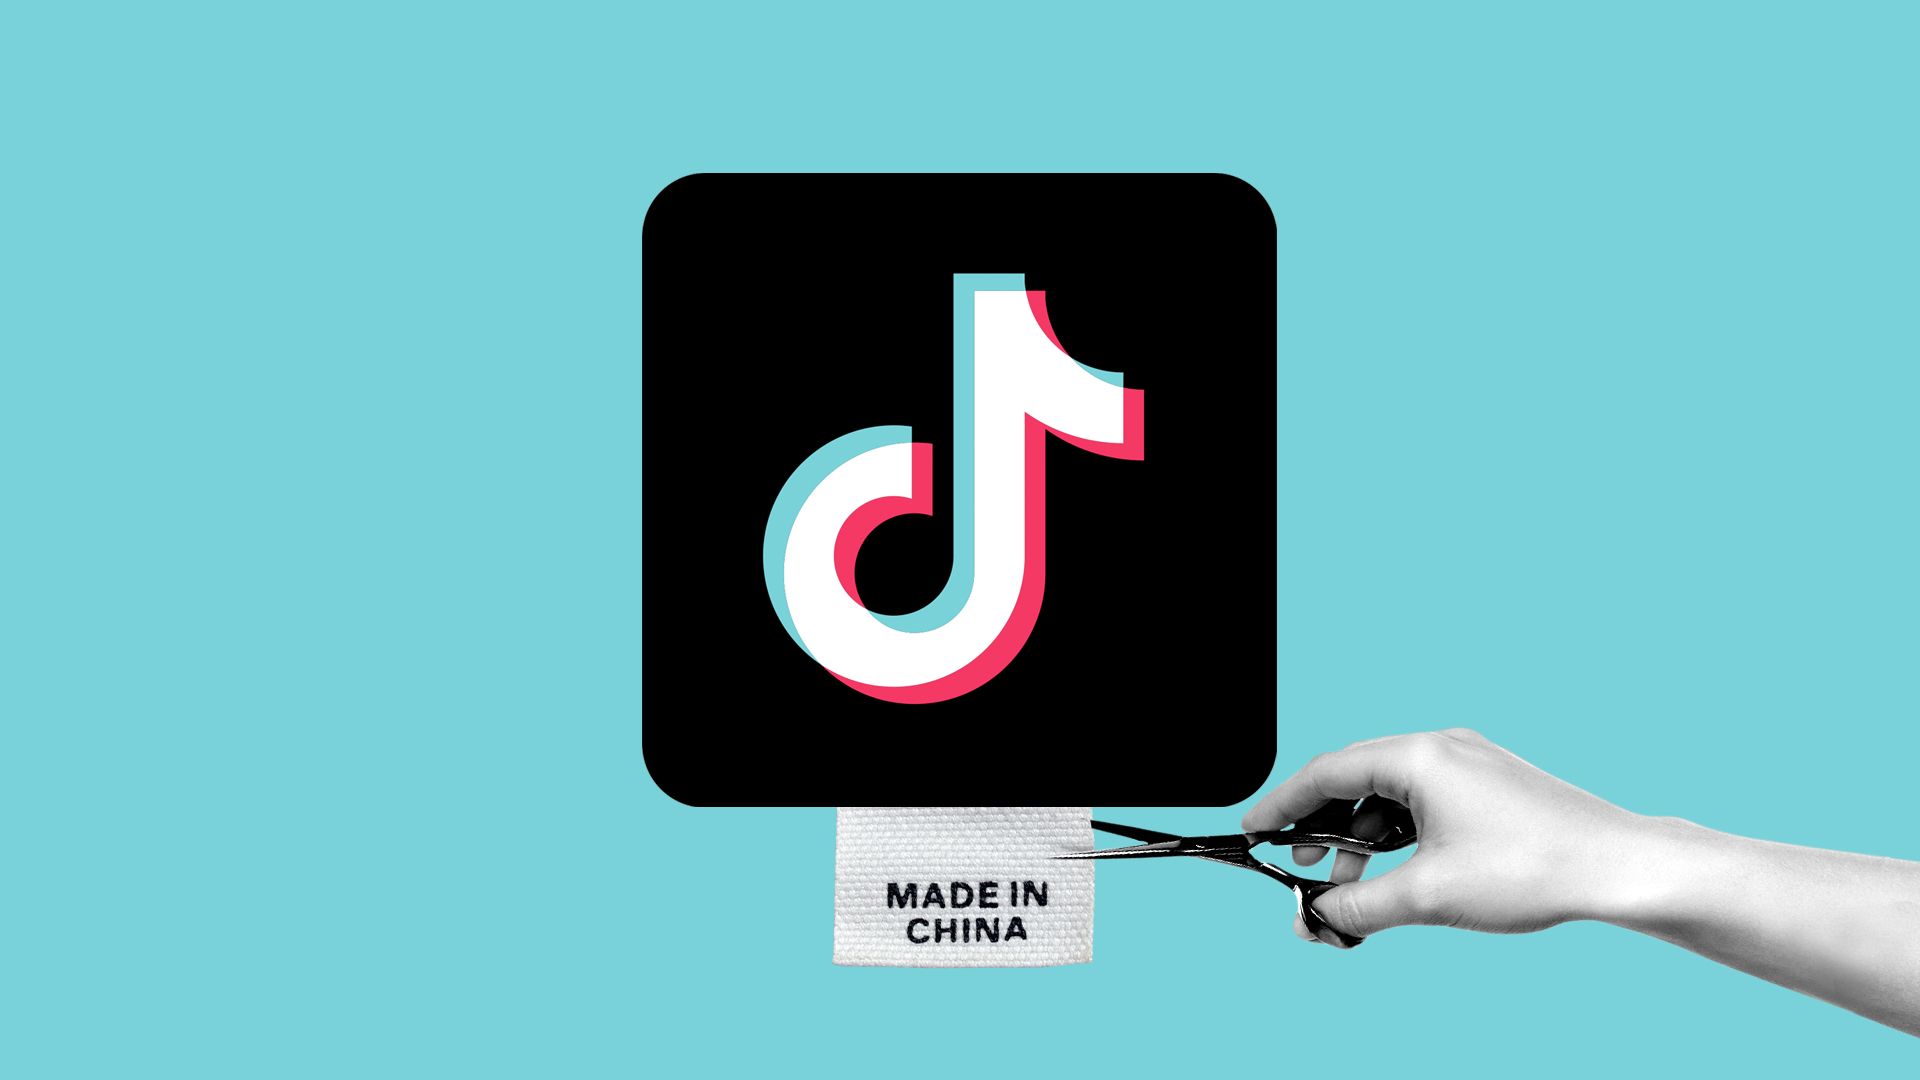 In this illustration, a label reading "Made in China" is attached to the TikTok logo 